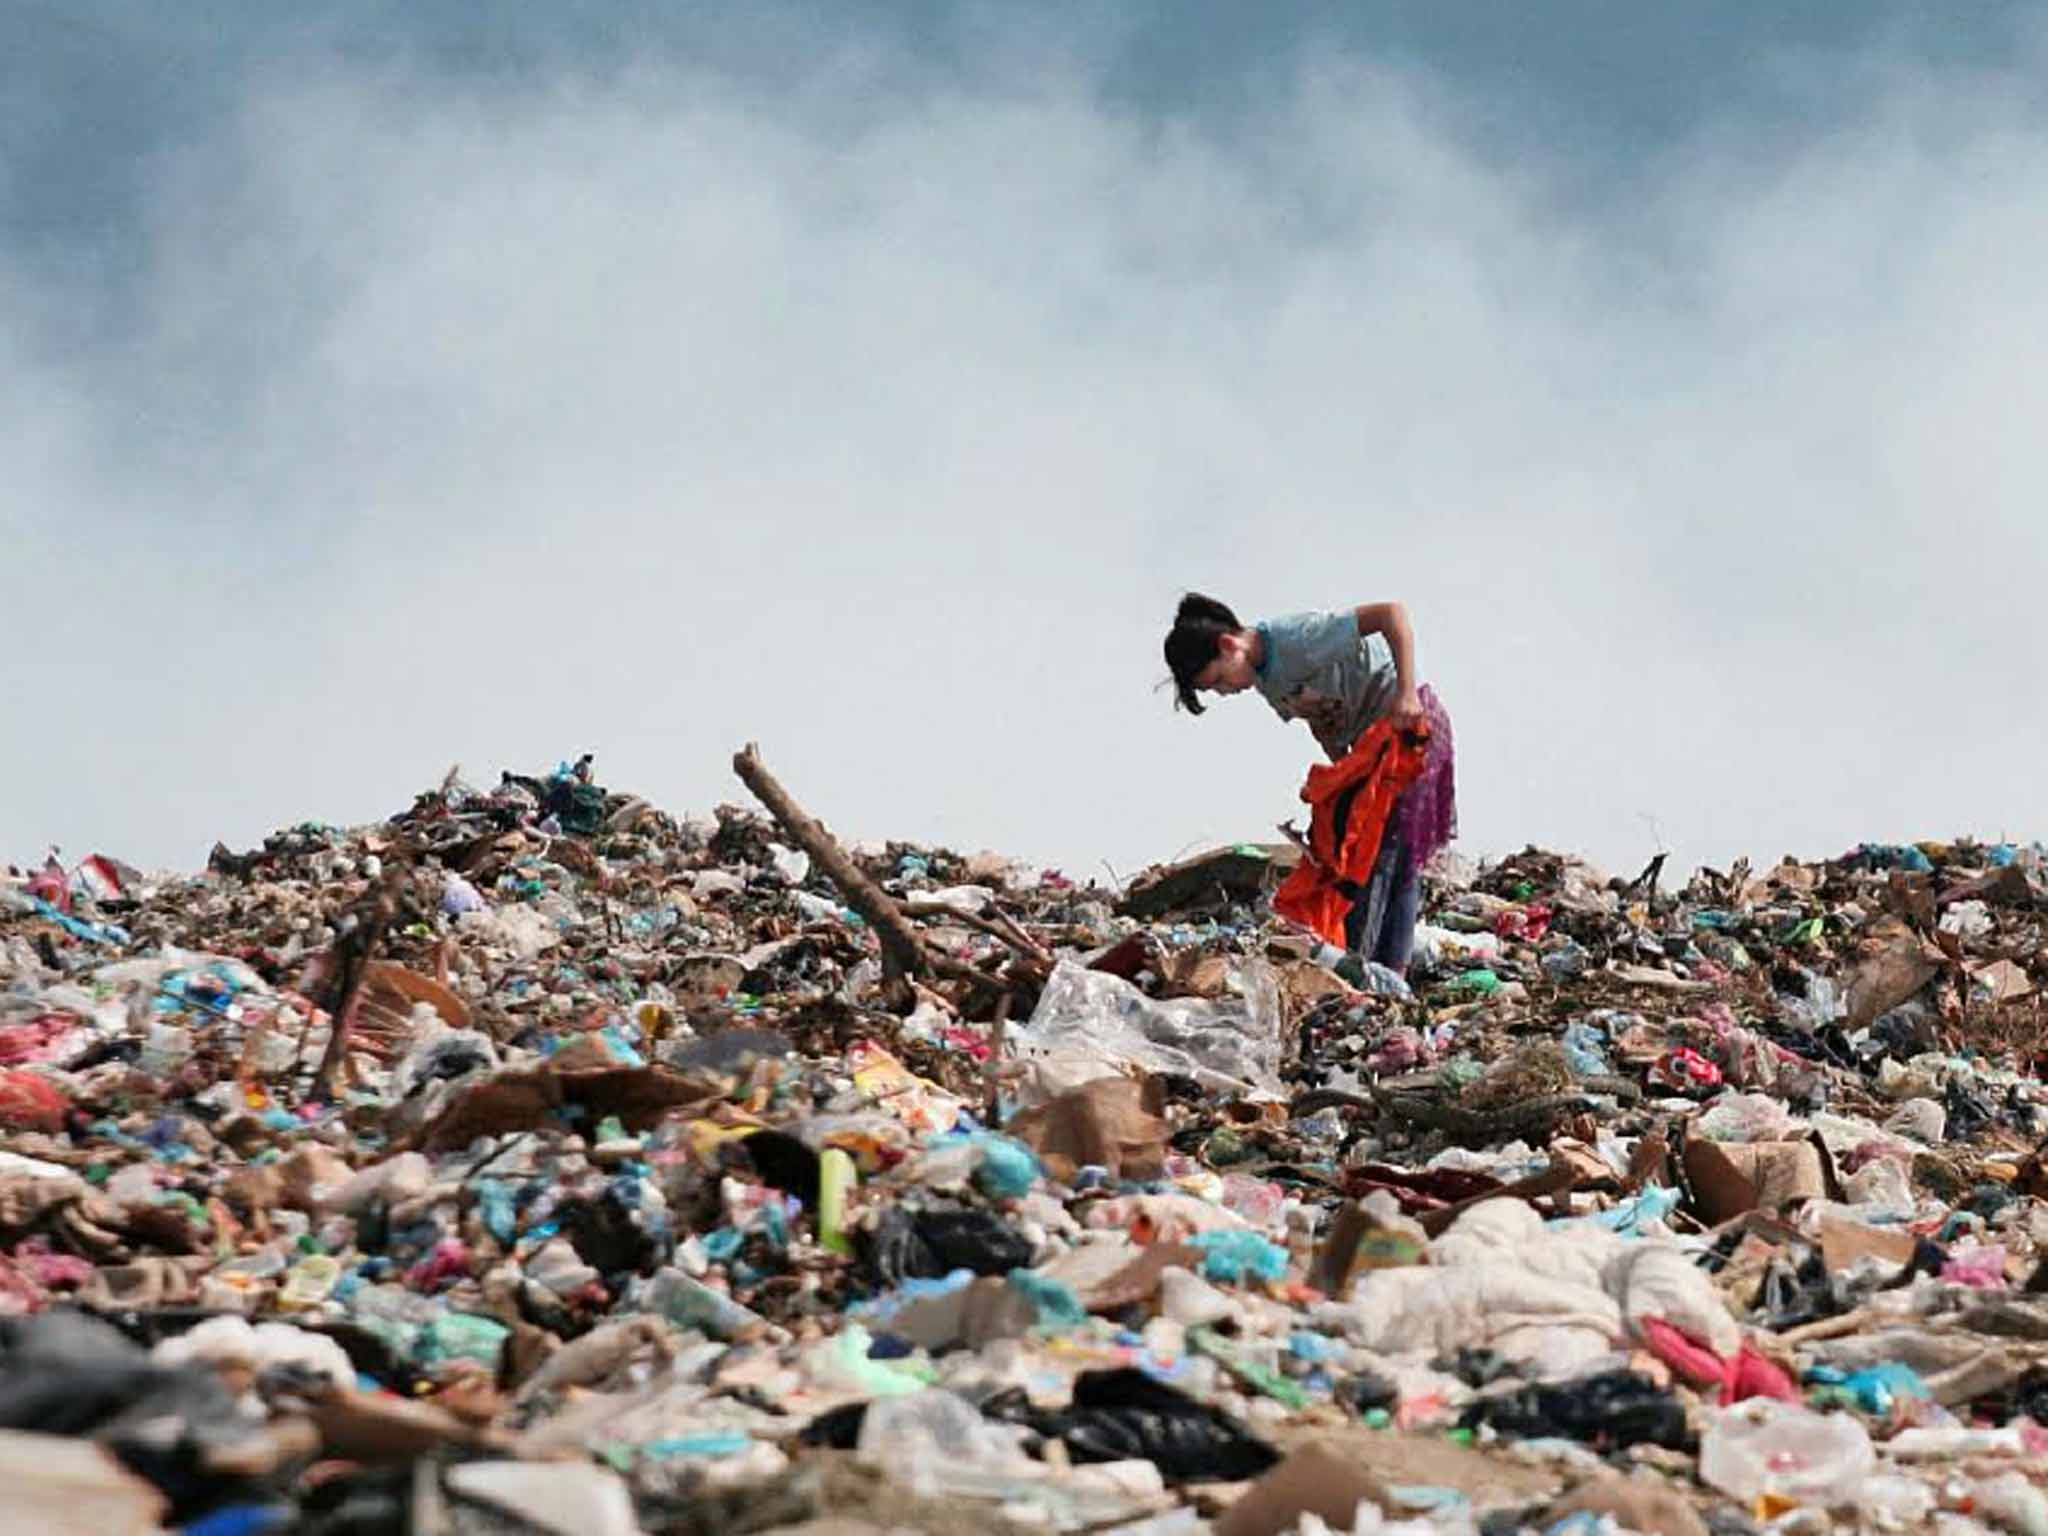 A young rubbish-picker sifts through the refuse